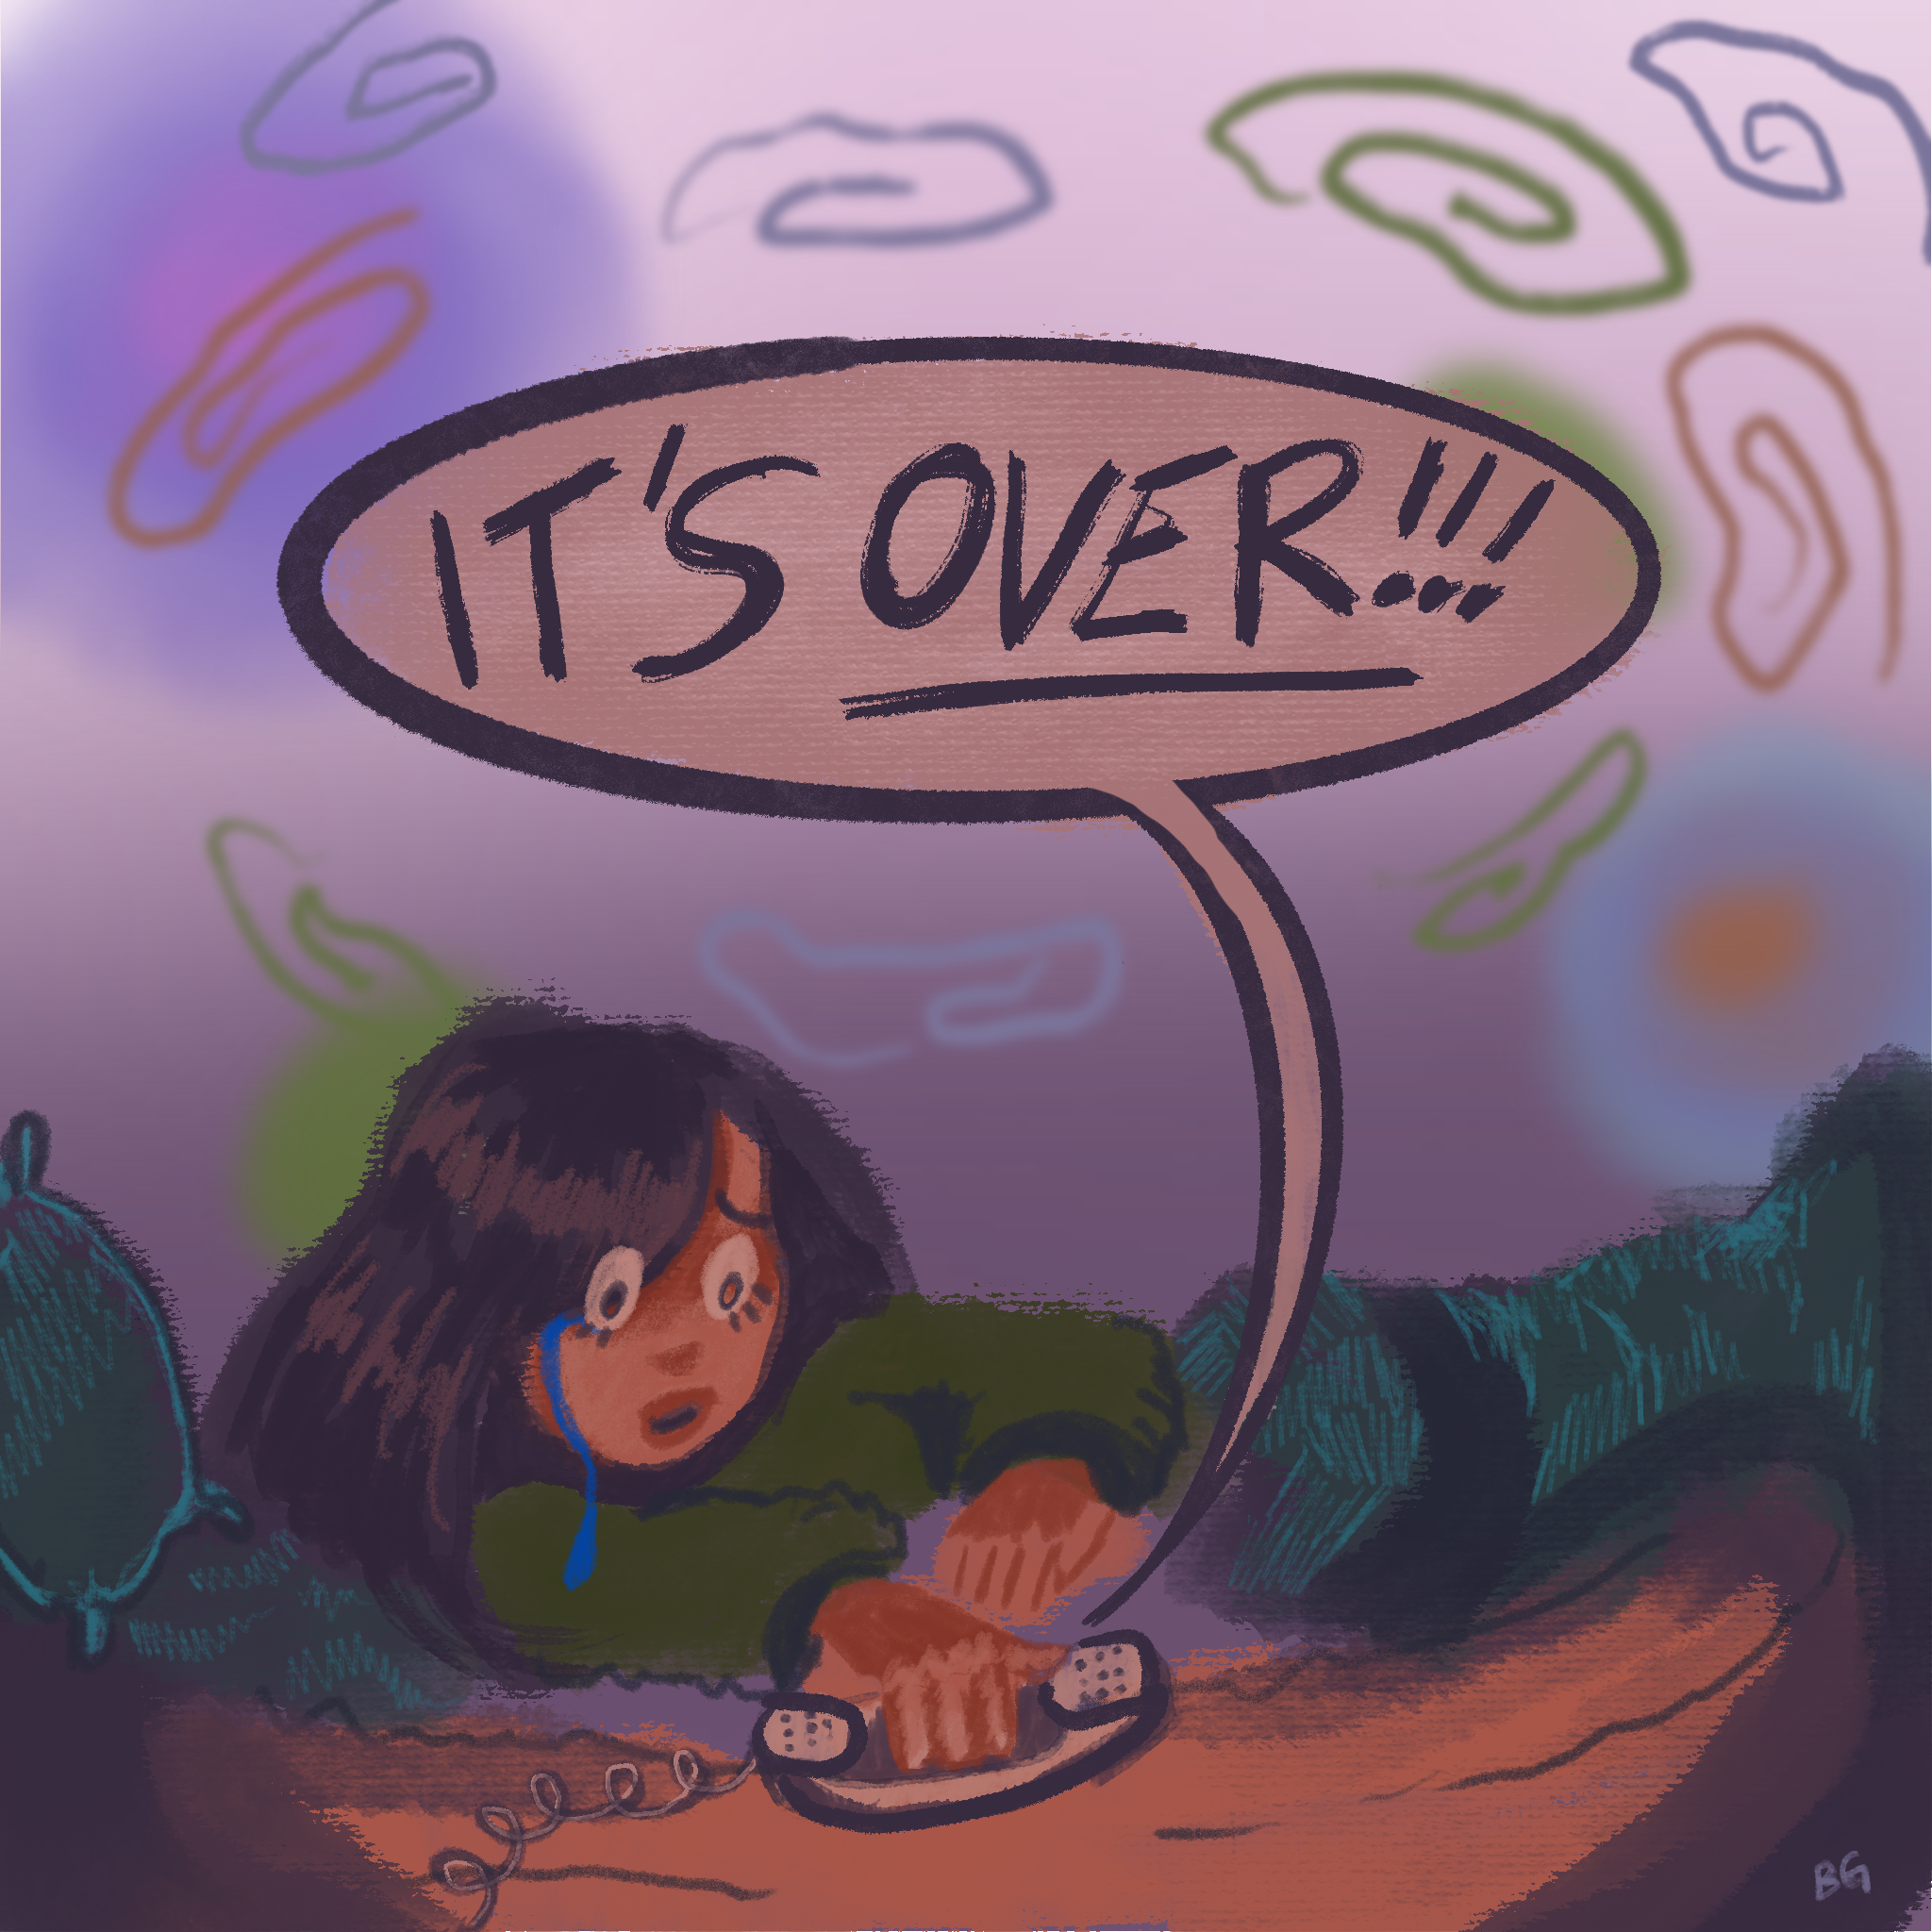 A young girl has a tear dripping from her face as she holds her telephone while the words "It's Over!!!" is in a speech bubble above her.